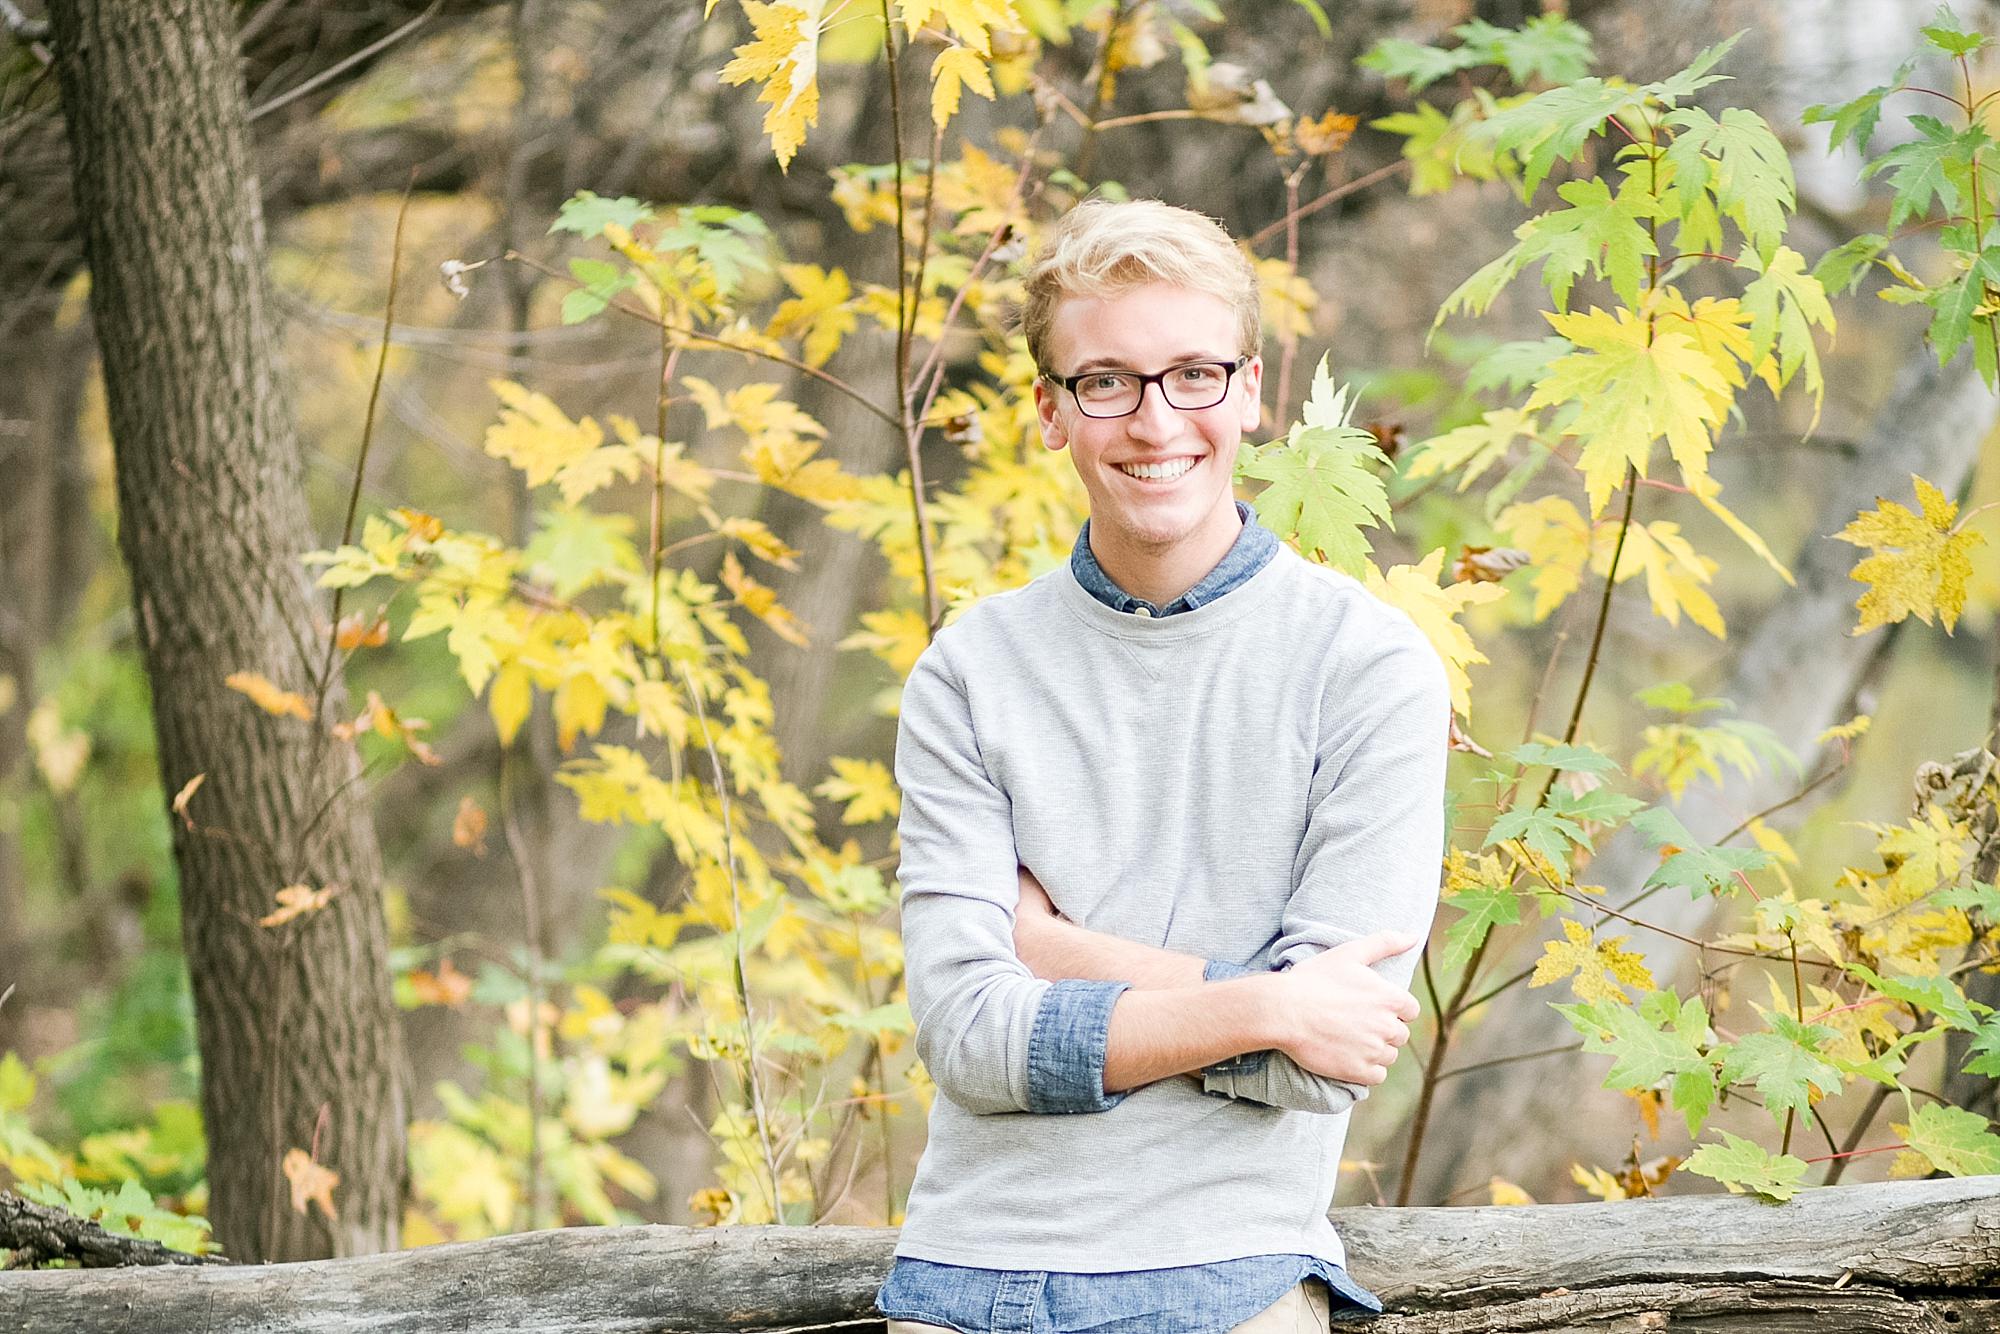 West Fargo Senior smiles and crosses his arms against a tree and the fall leaves